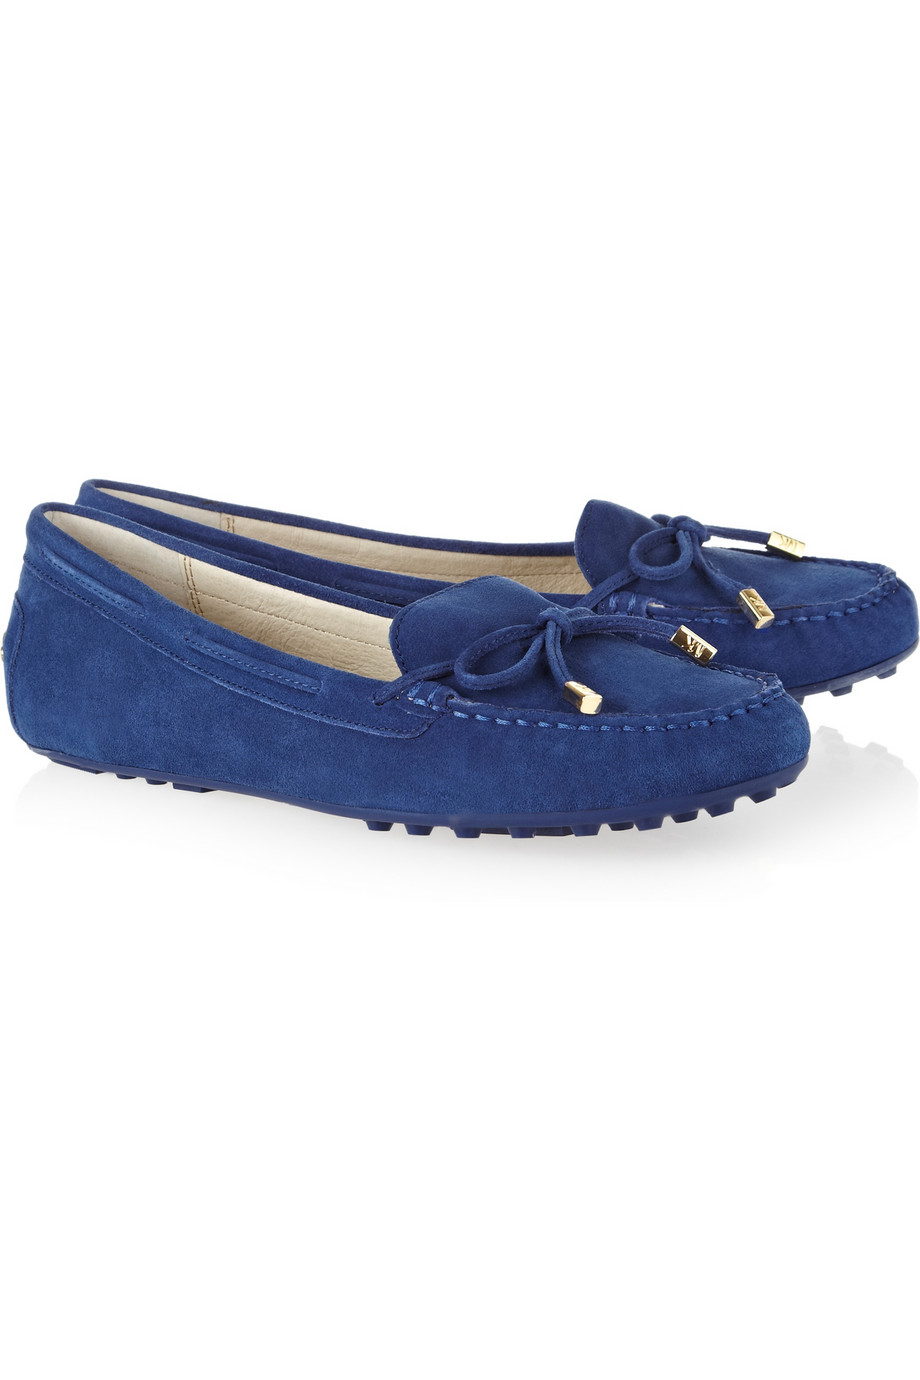 Lyst - Michael Michael Kors Daisy Suede Moccasins in Blue